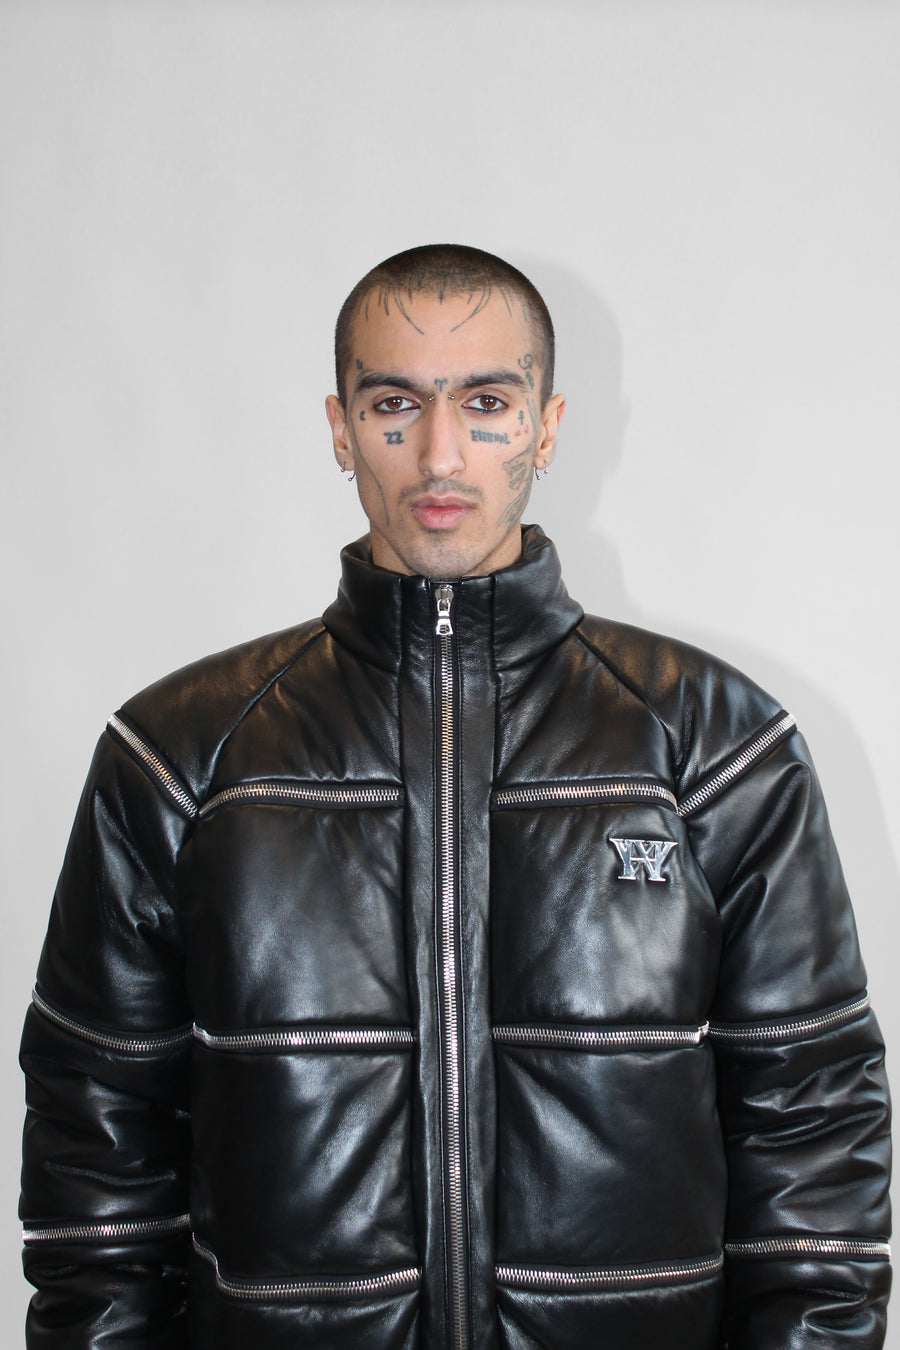 THE ZIP LEATHER PUFFER JACKET